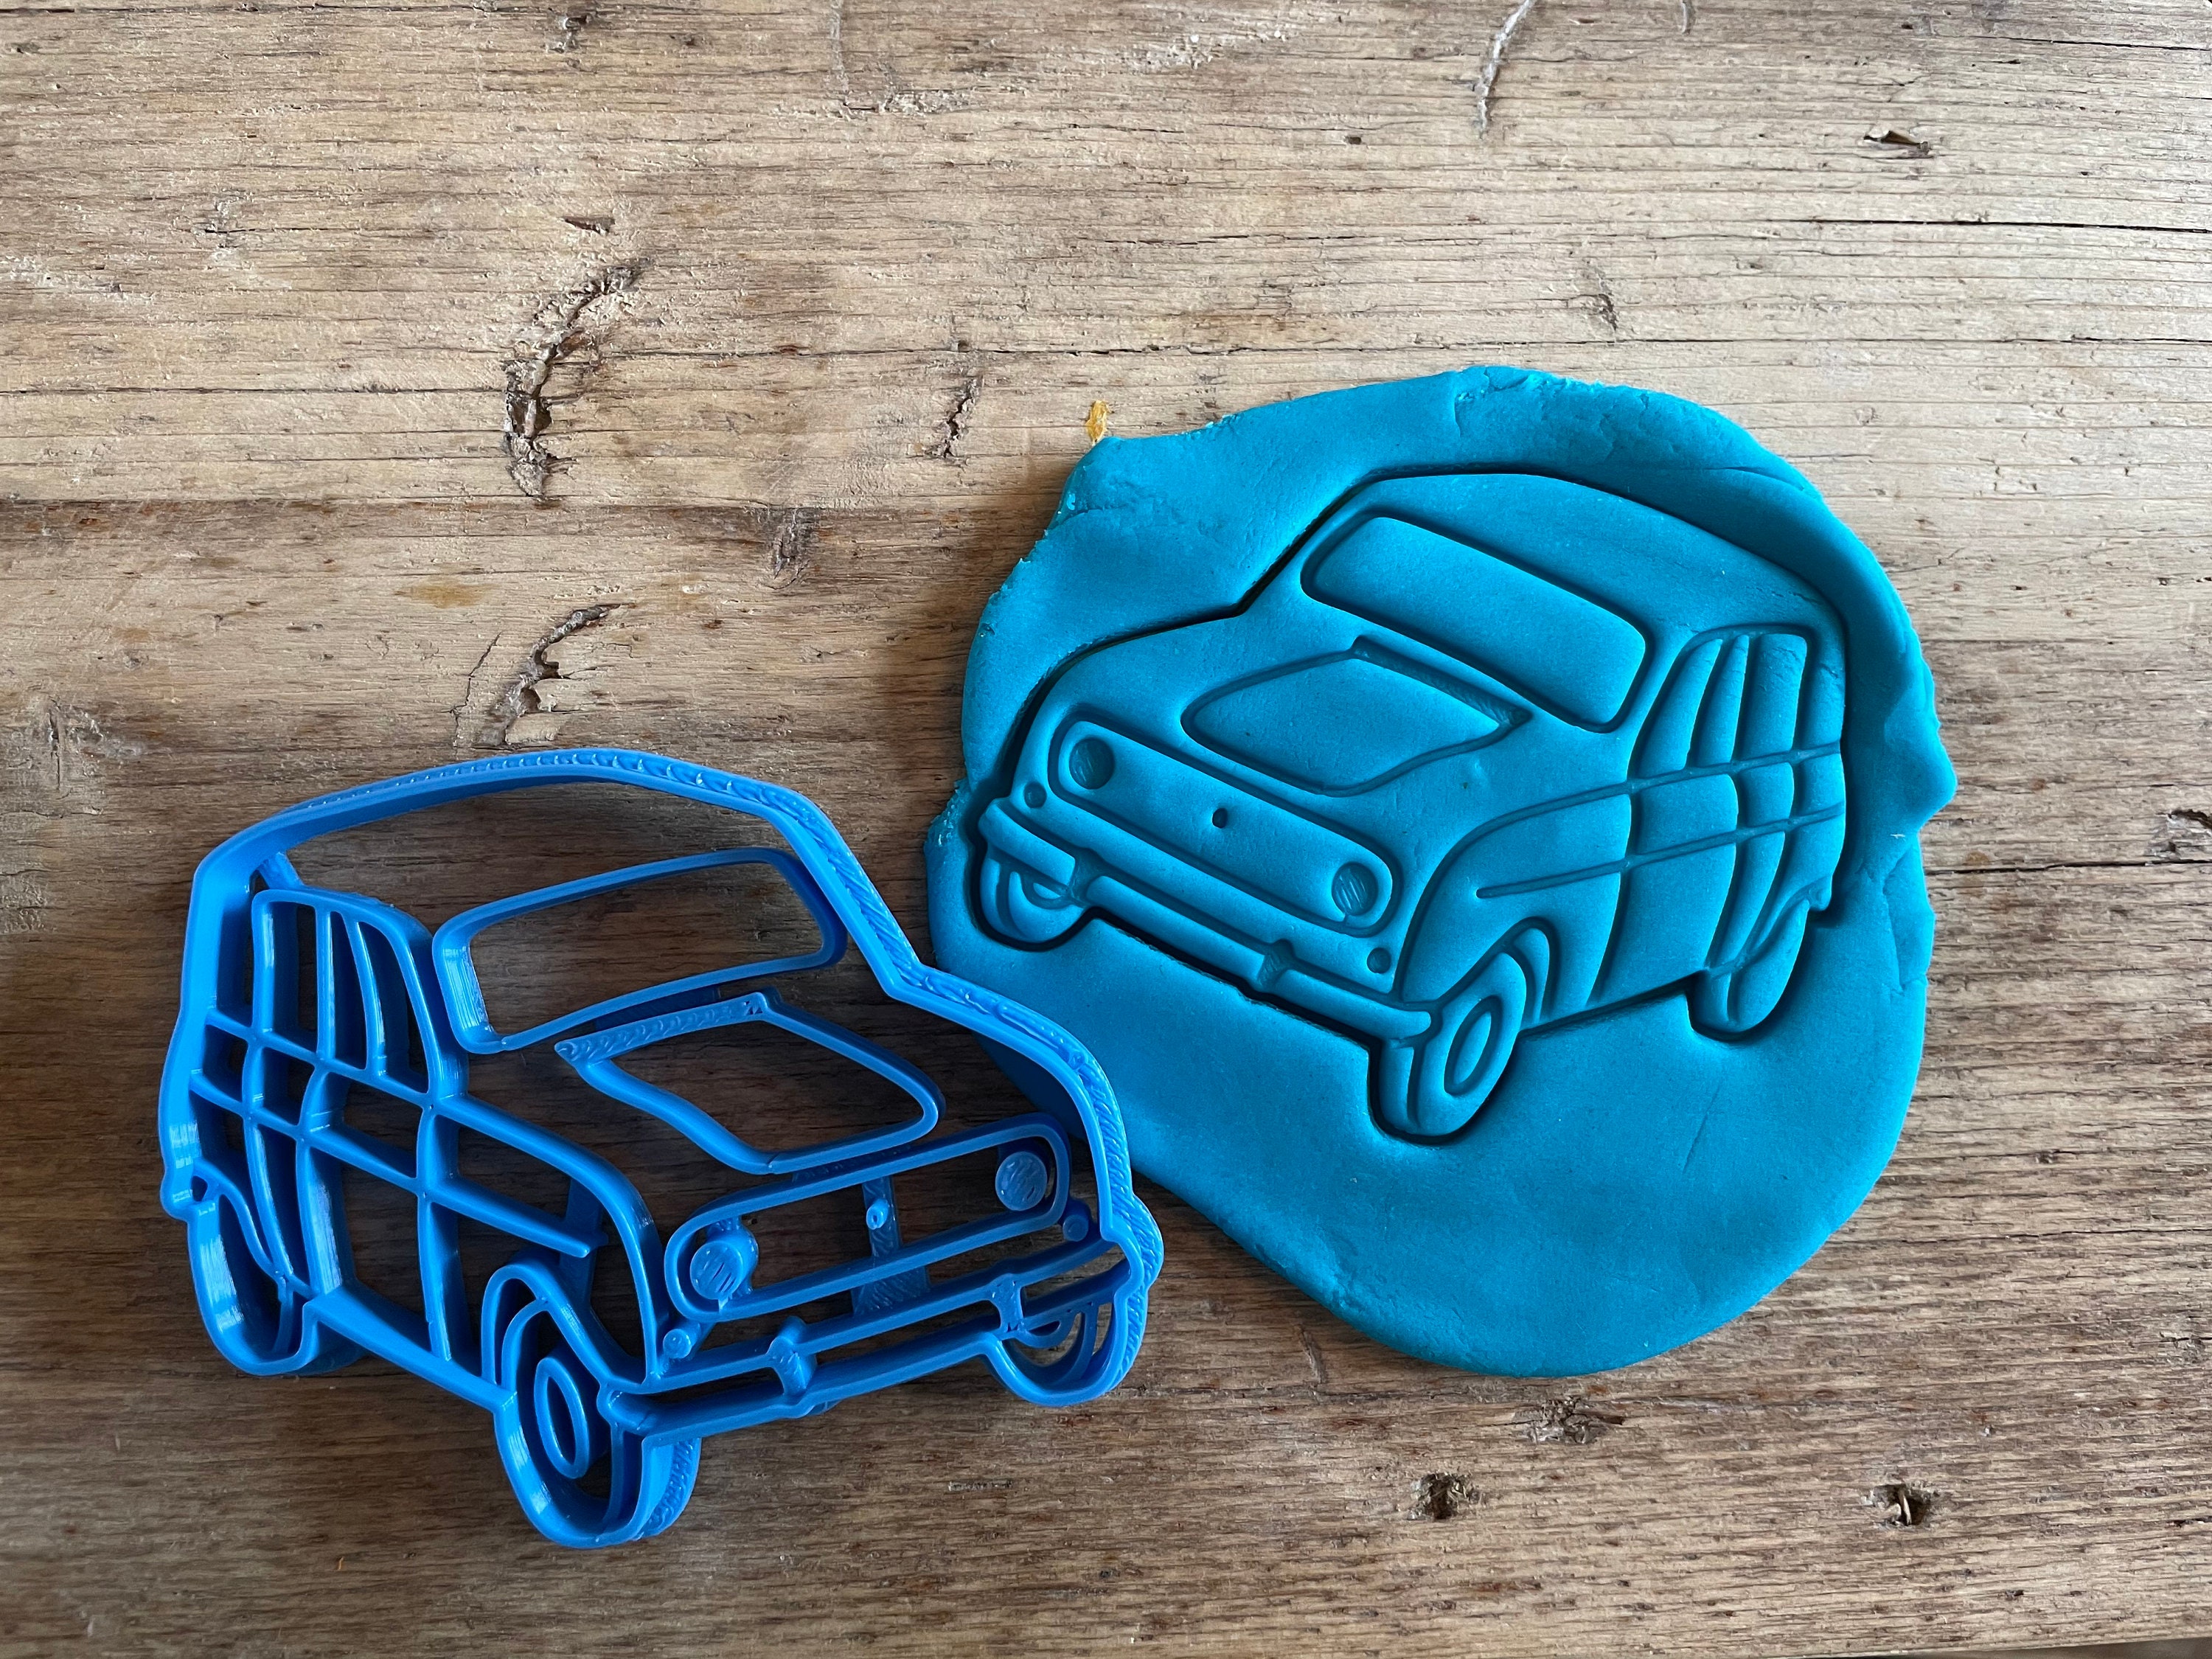 Renault 4 cookie/ biscuit cutter car decorating baking 